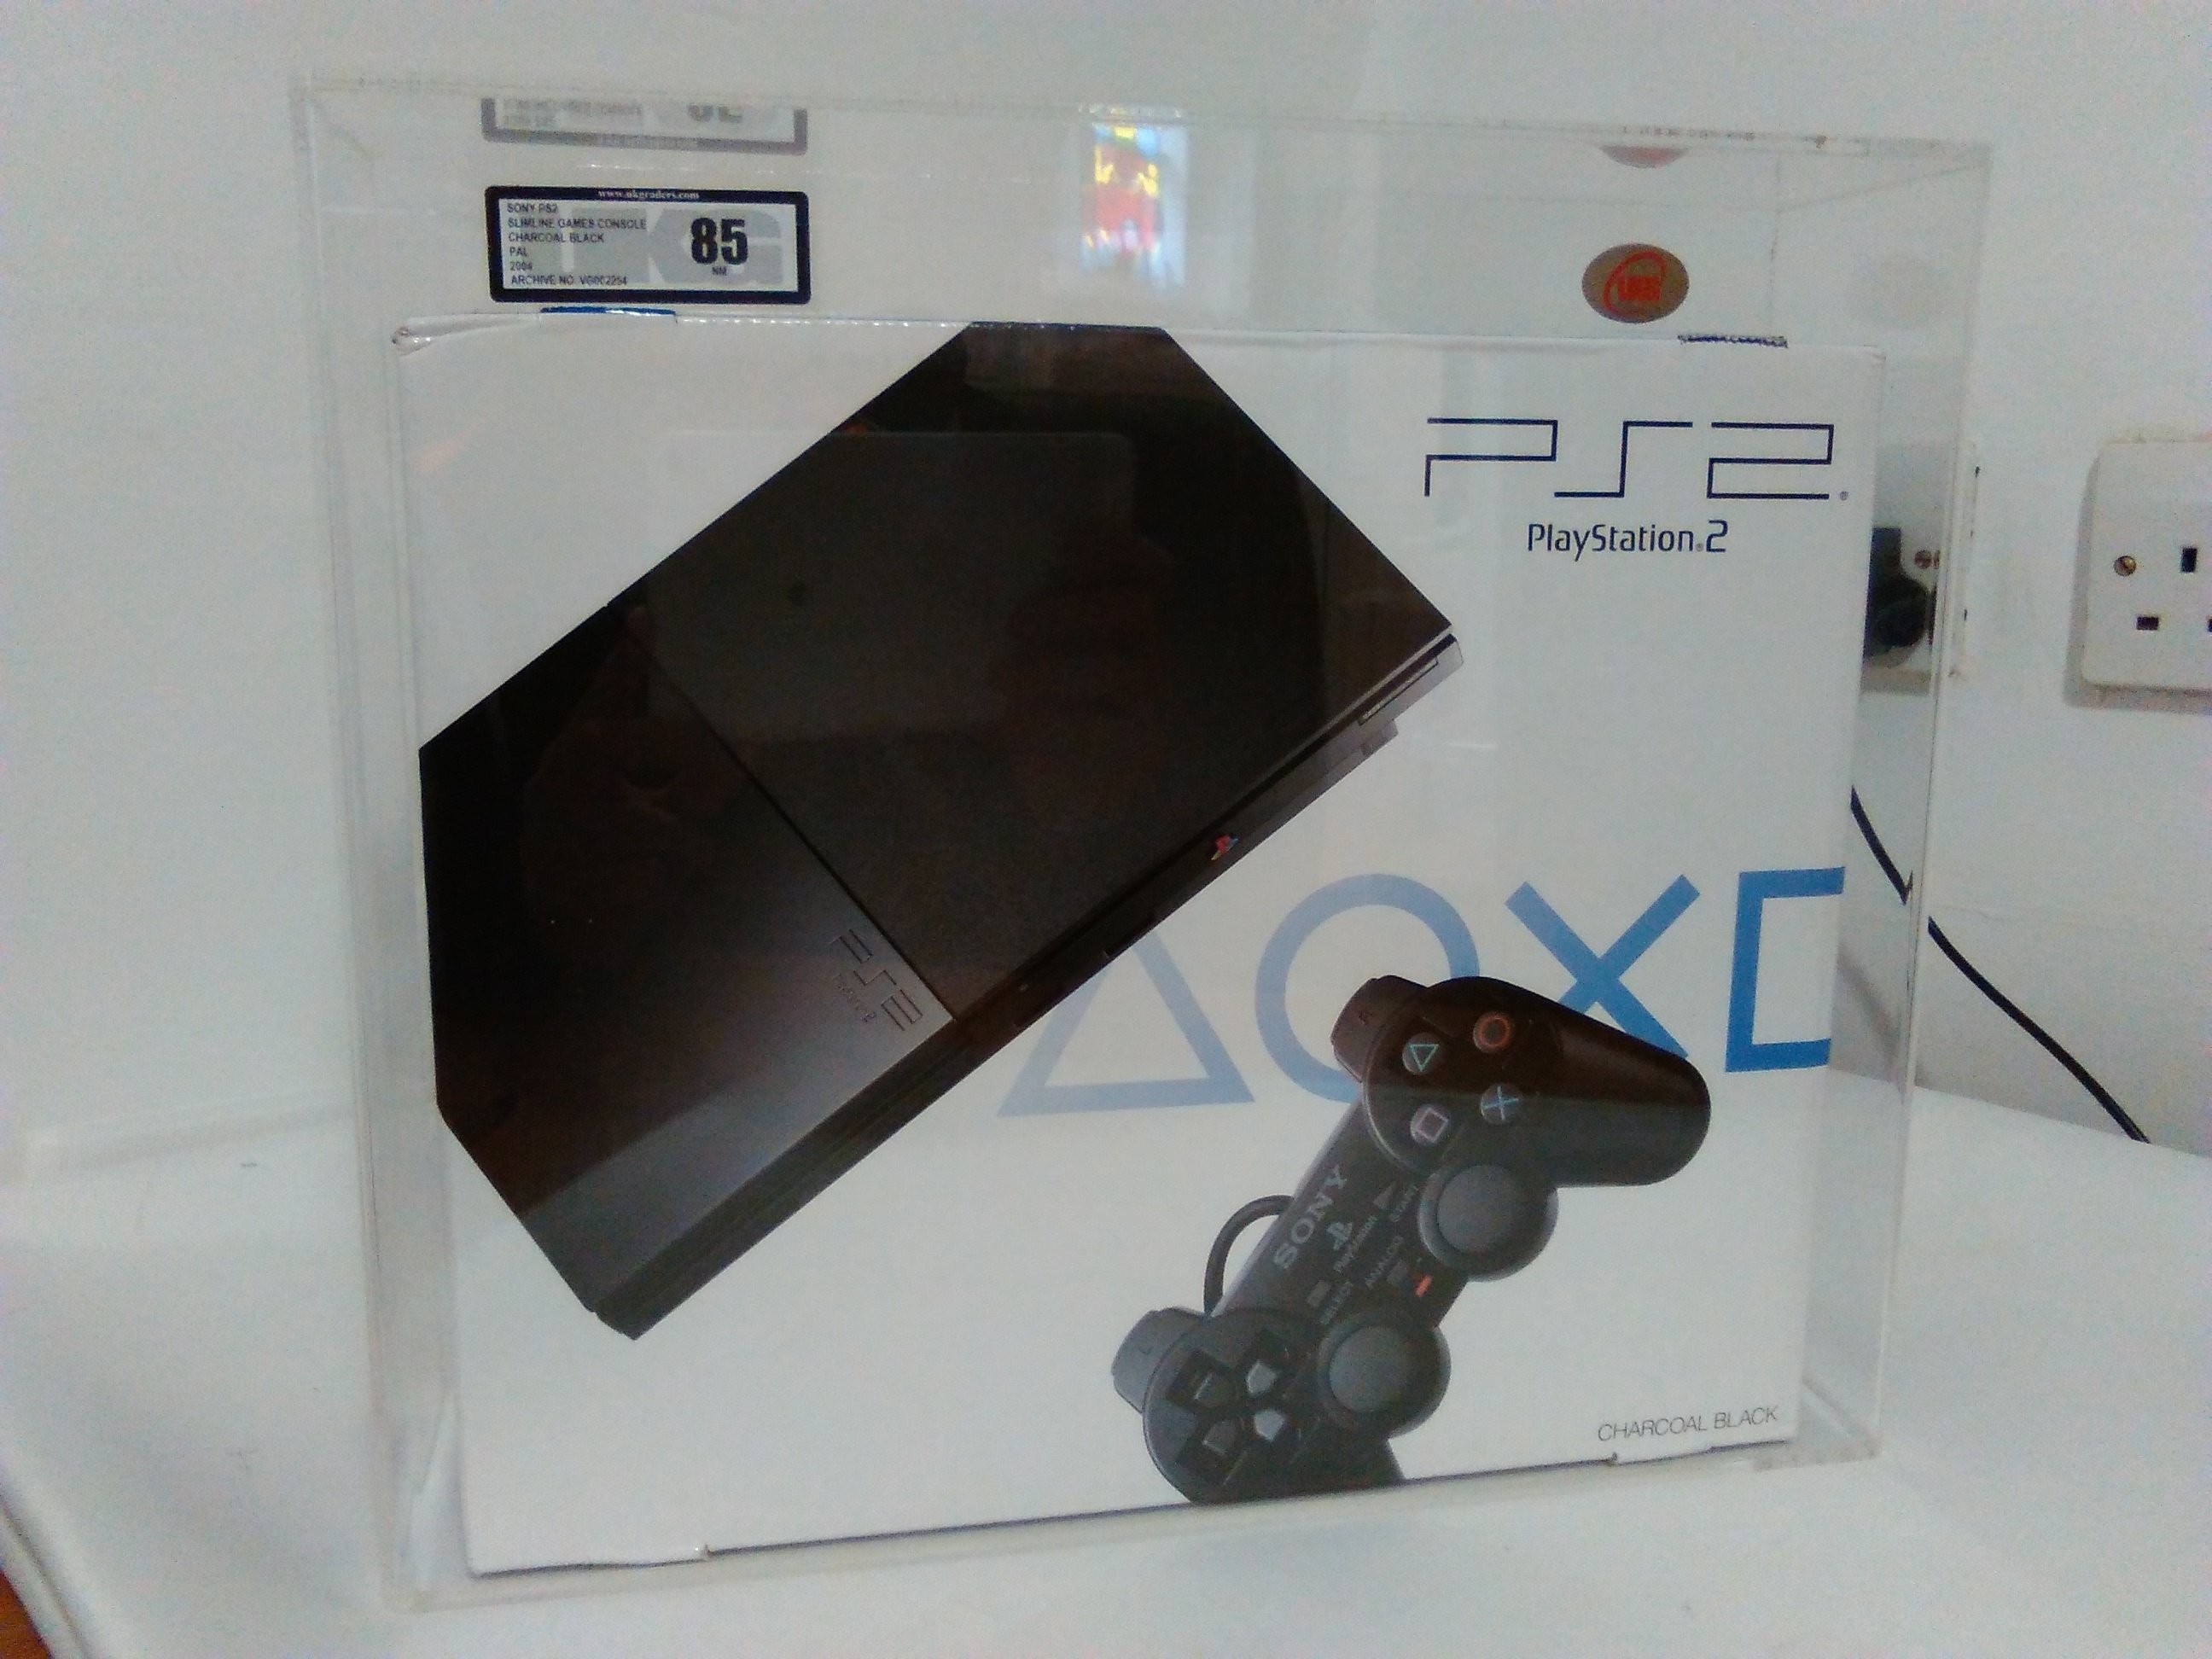 udvikling belastning bred The Toy Planet on Twitter: "#Playstation2 (PS2 SLIM) CONSOLE BLACK - MODEL  SCPH-90004 SEALED UKG GRADED 85NM. Graded by UK GRADERS COLLECTABLE GRADING  COMPANY, at 85 Near Mint. Comes Sealed inside a